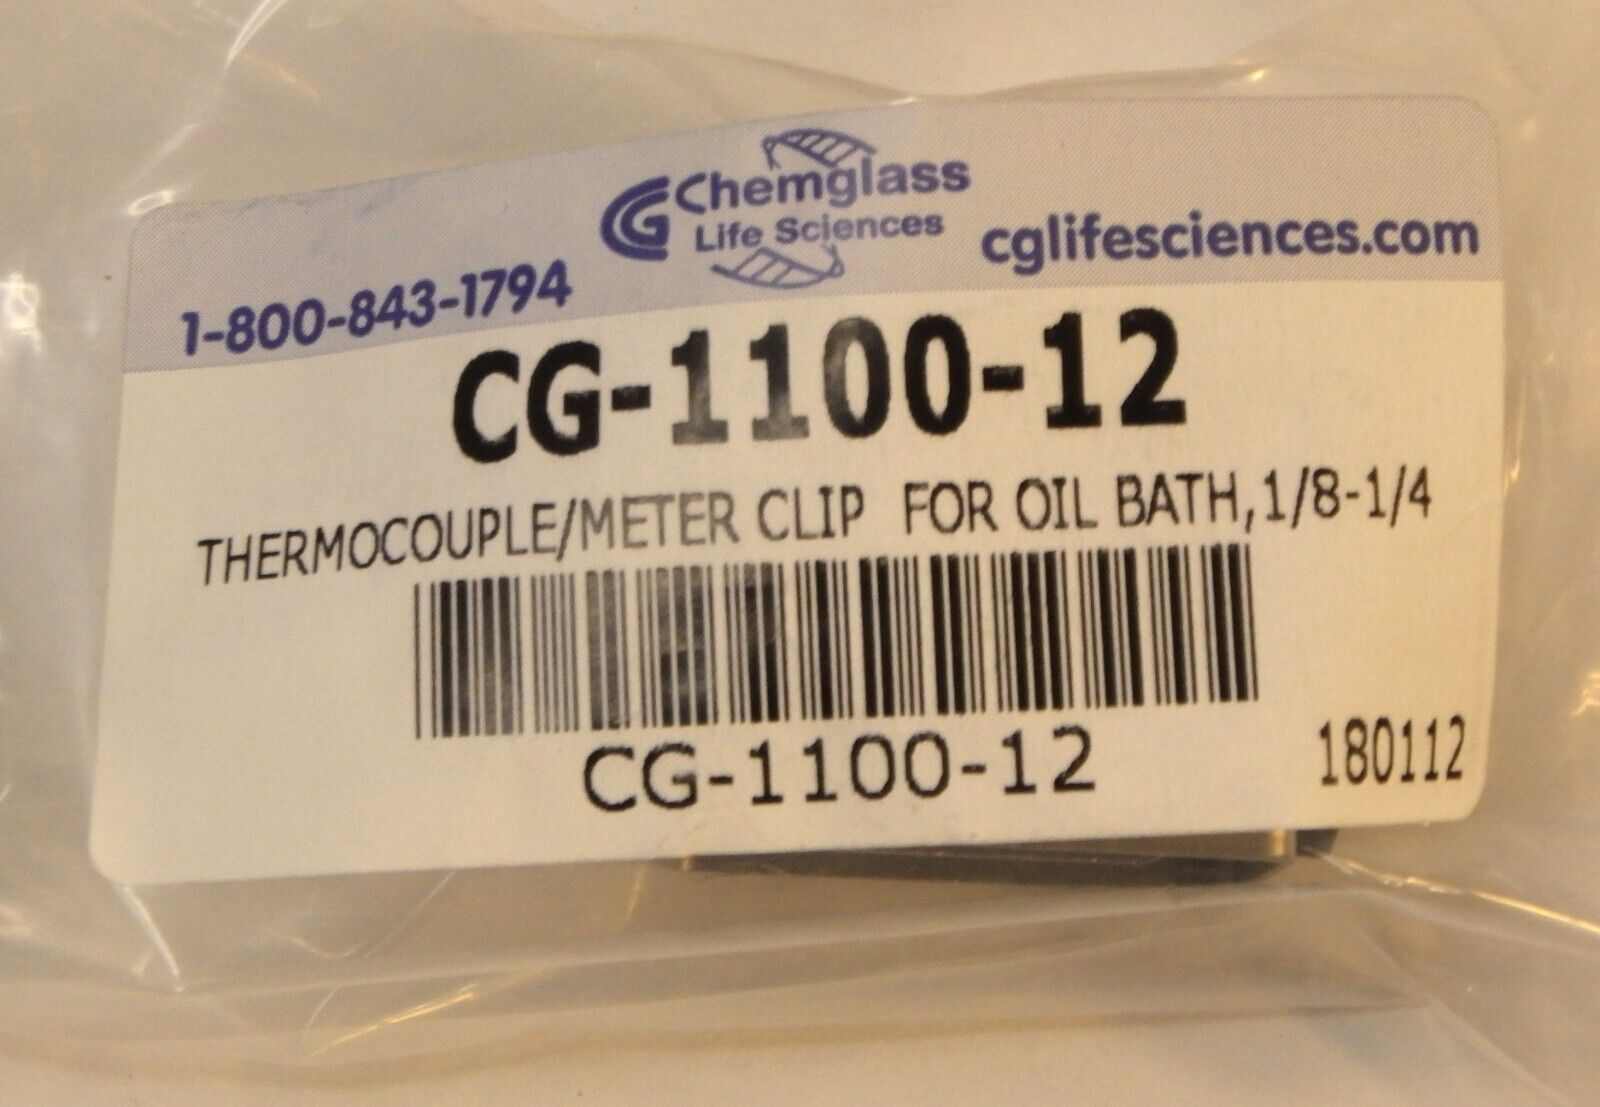 ChemGlass 1100-12 STAINLESS STEEL Thermocouple/Meter Clip for Oil Bath - New